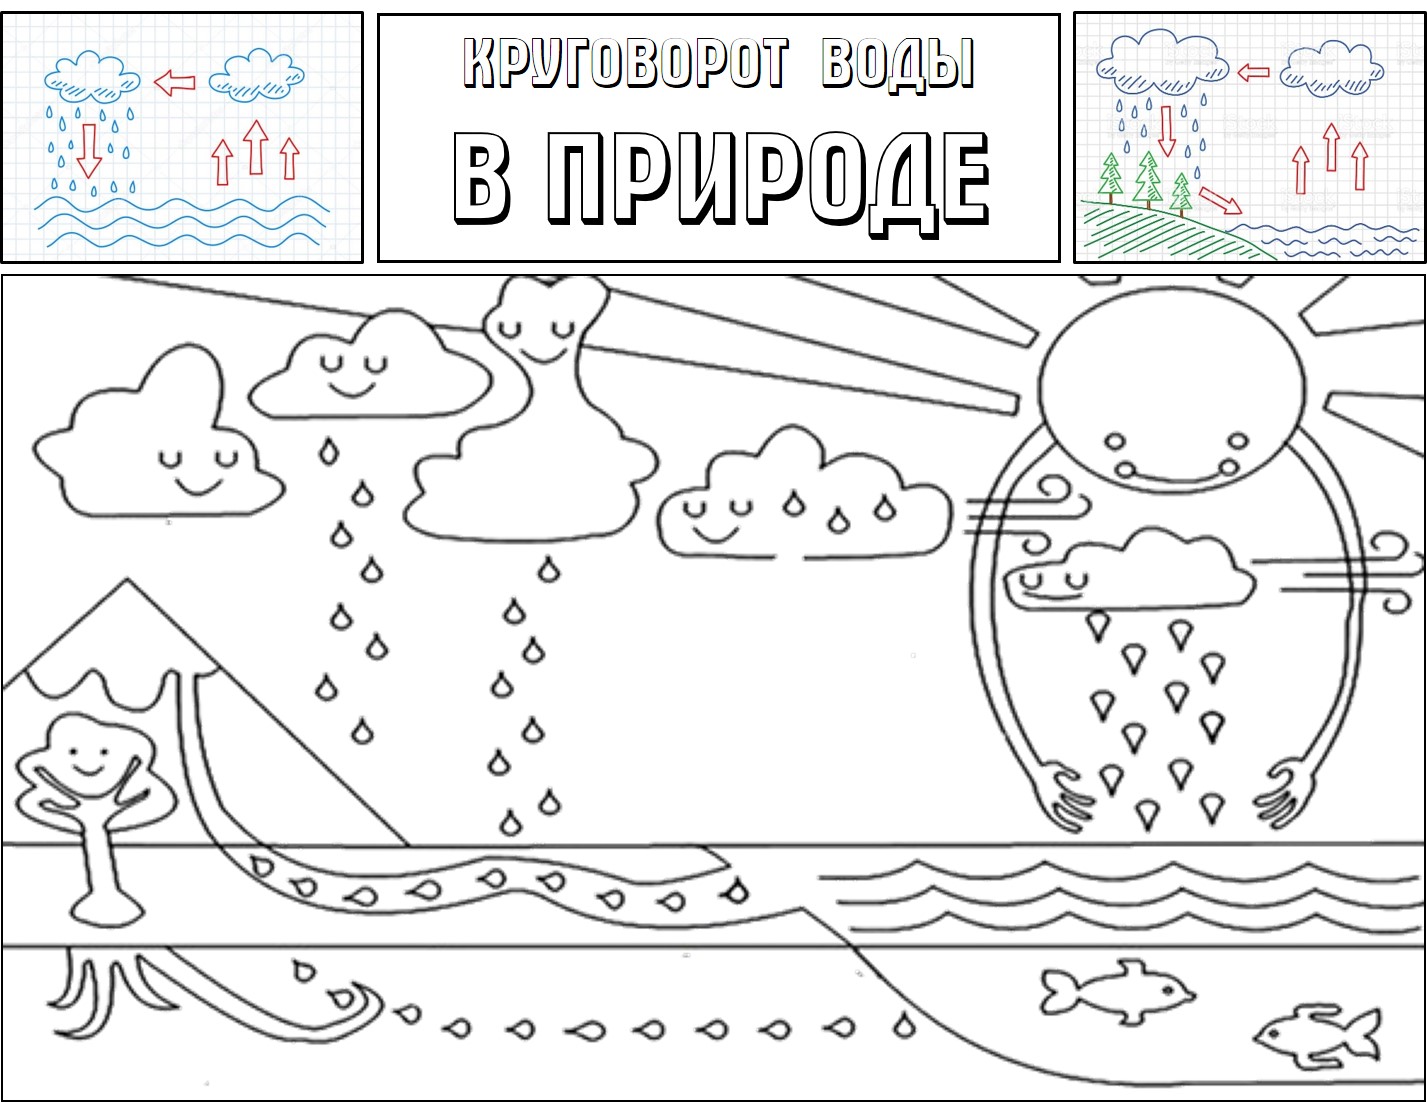 The water cycle for kids #16